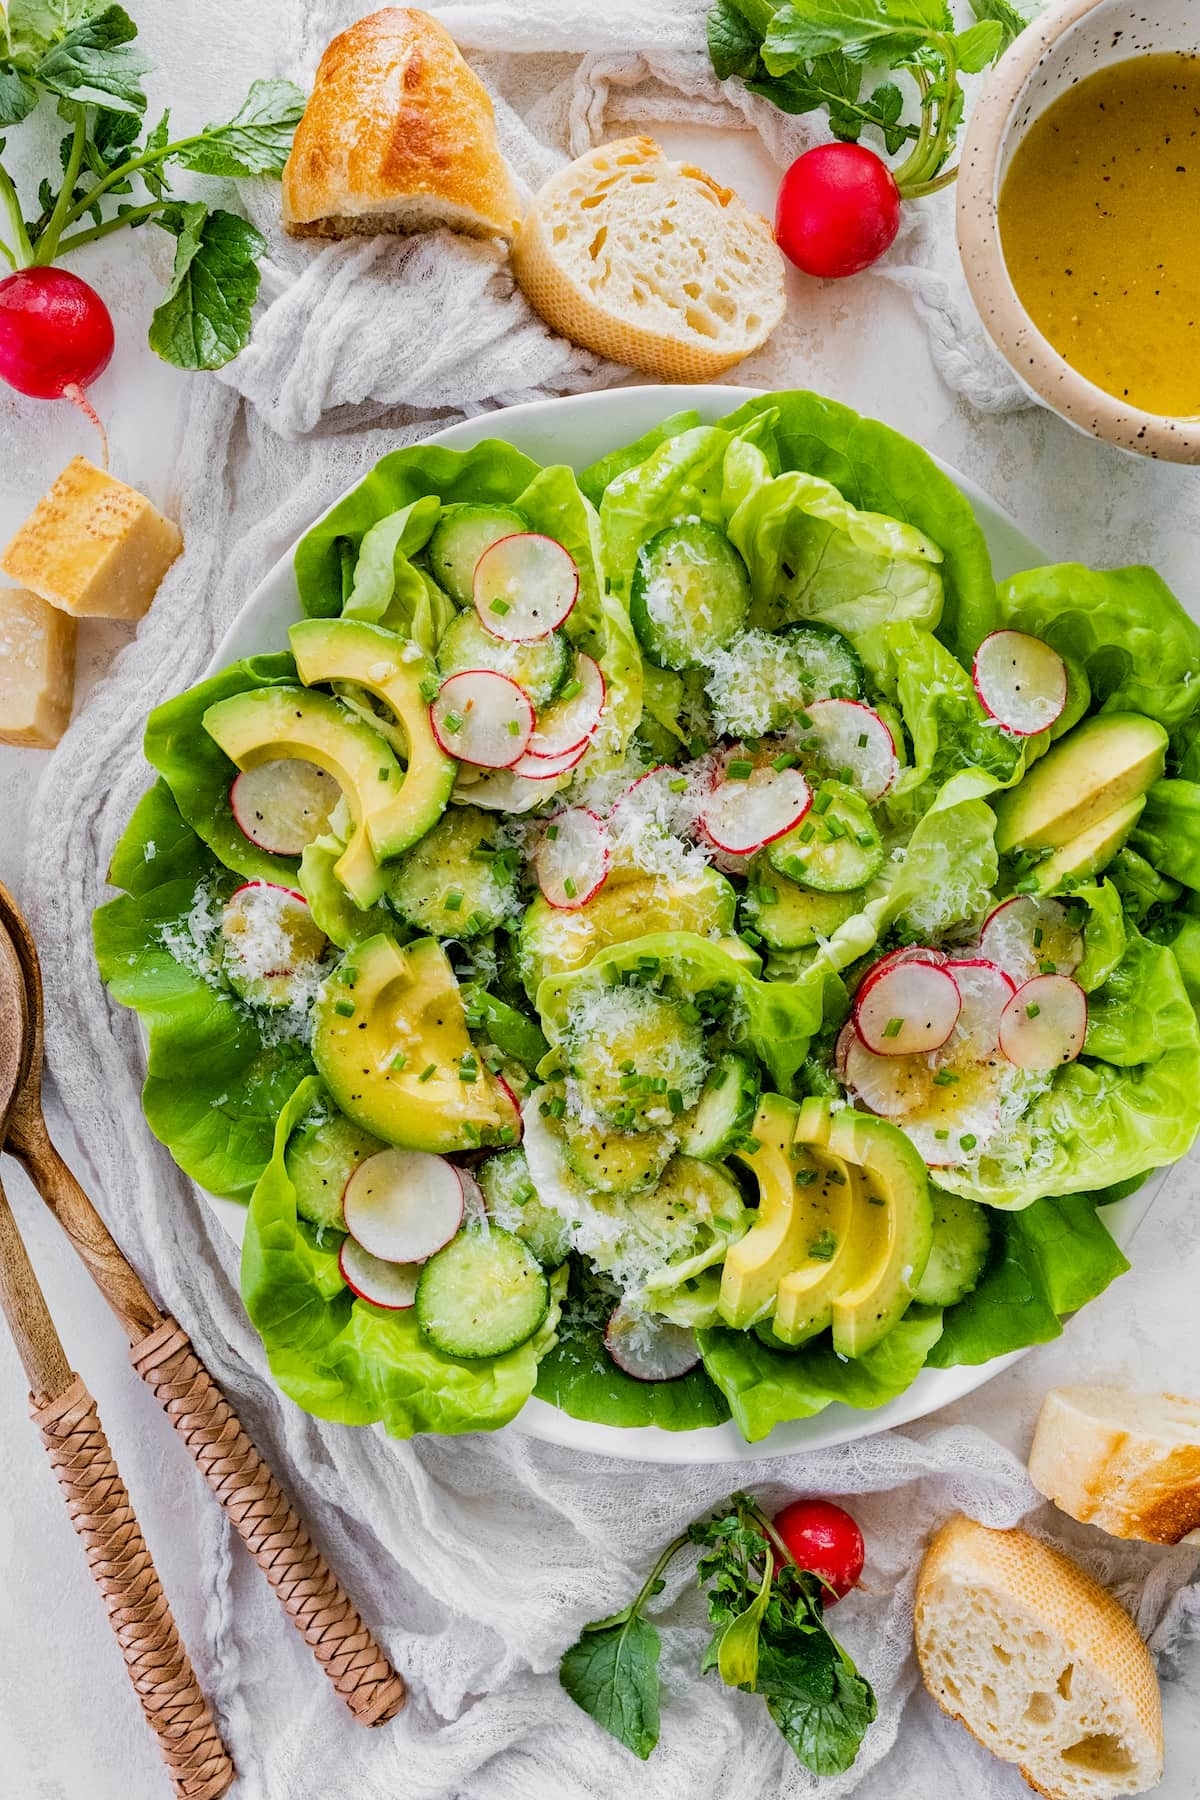 Fresh salad with avocado slices, radishes, cucumber, lettuce, and grated cheese, served with bread on the side